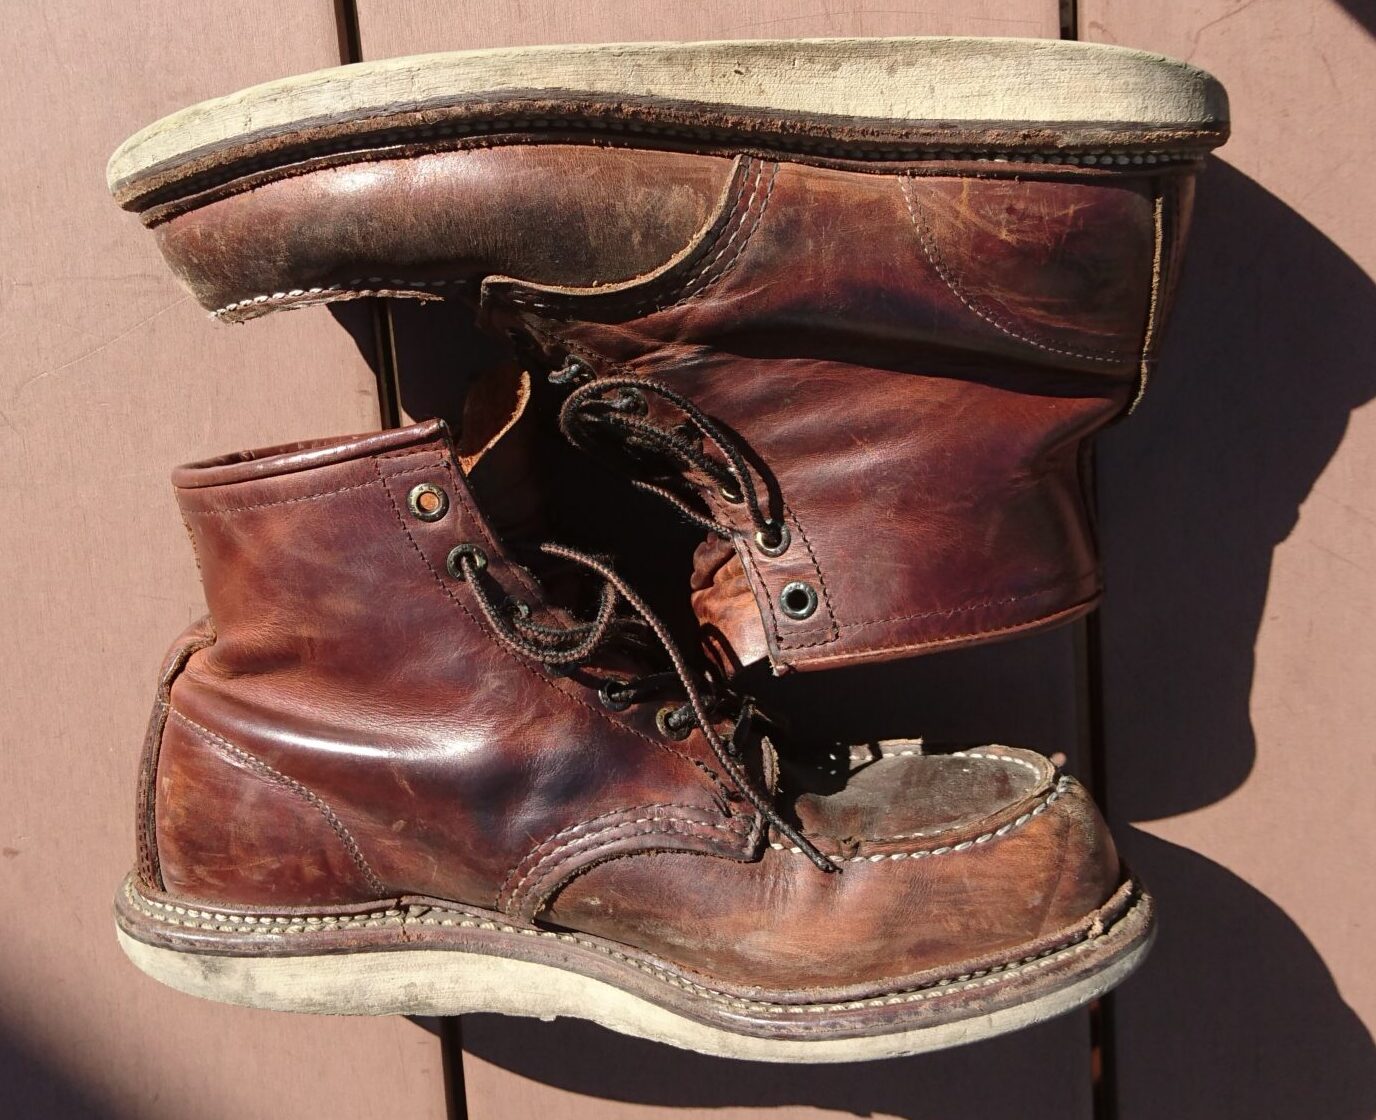 redwing1907 カッパーラフ＆タフ　経年変化　エイジング　革　ワークブーツ